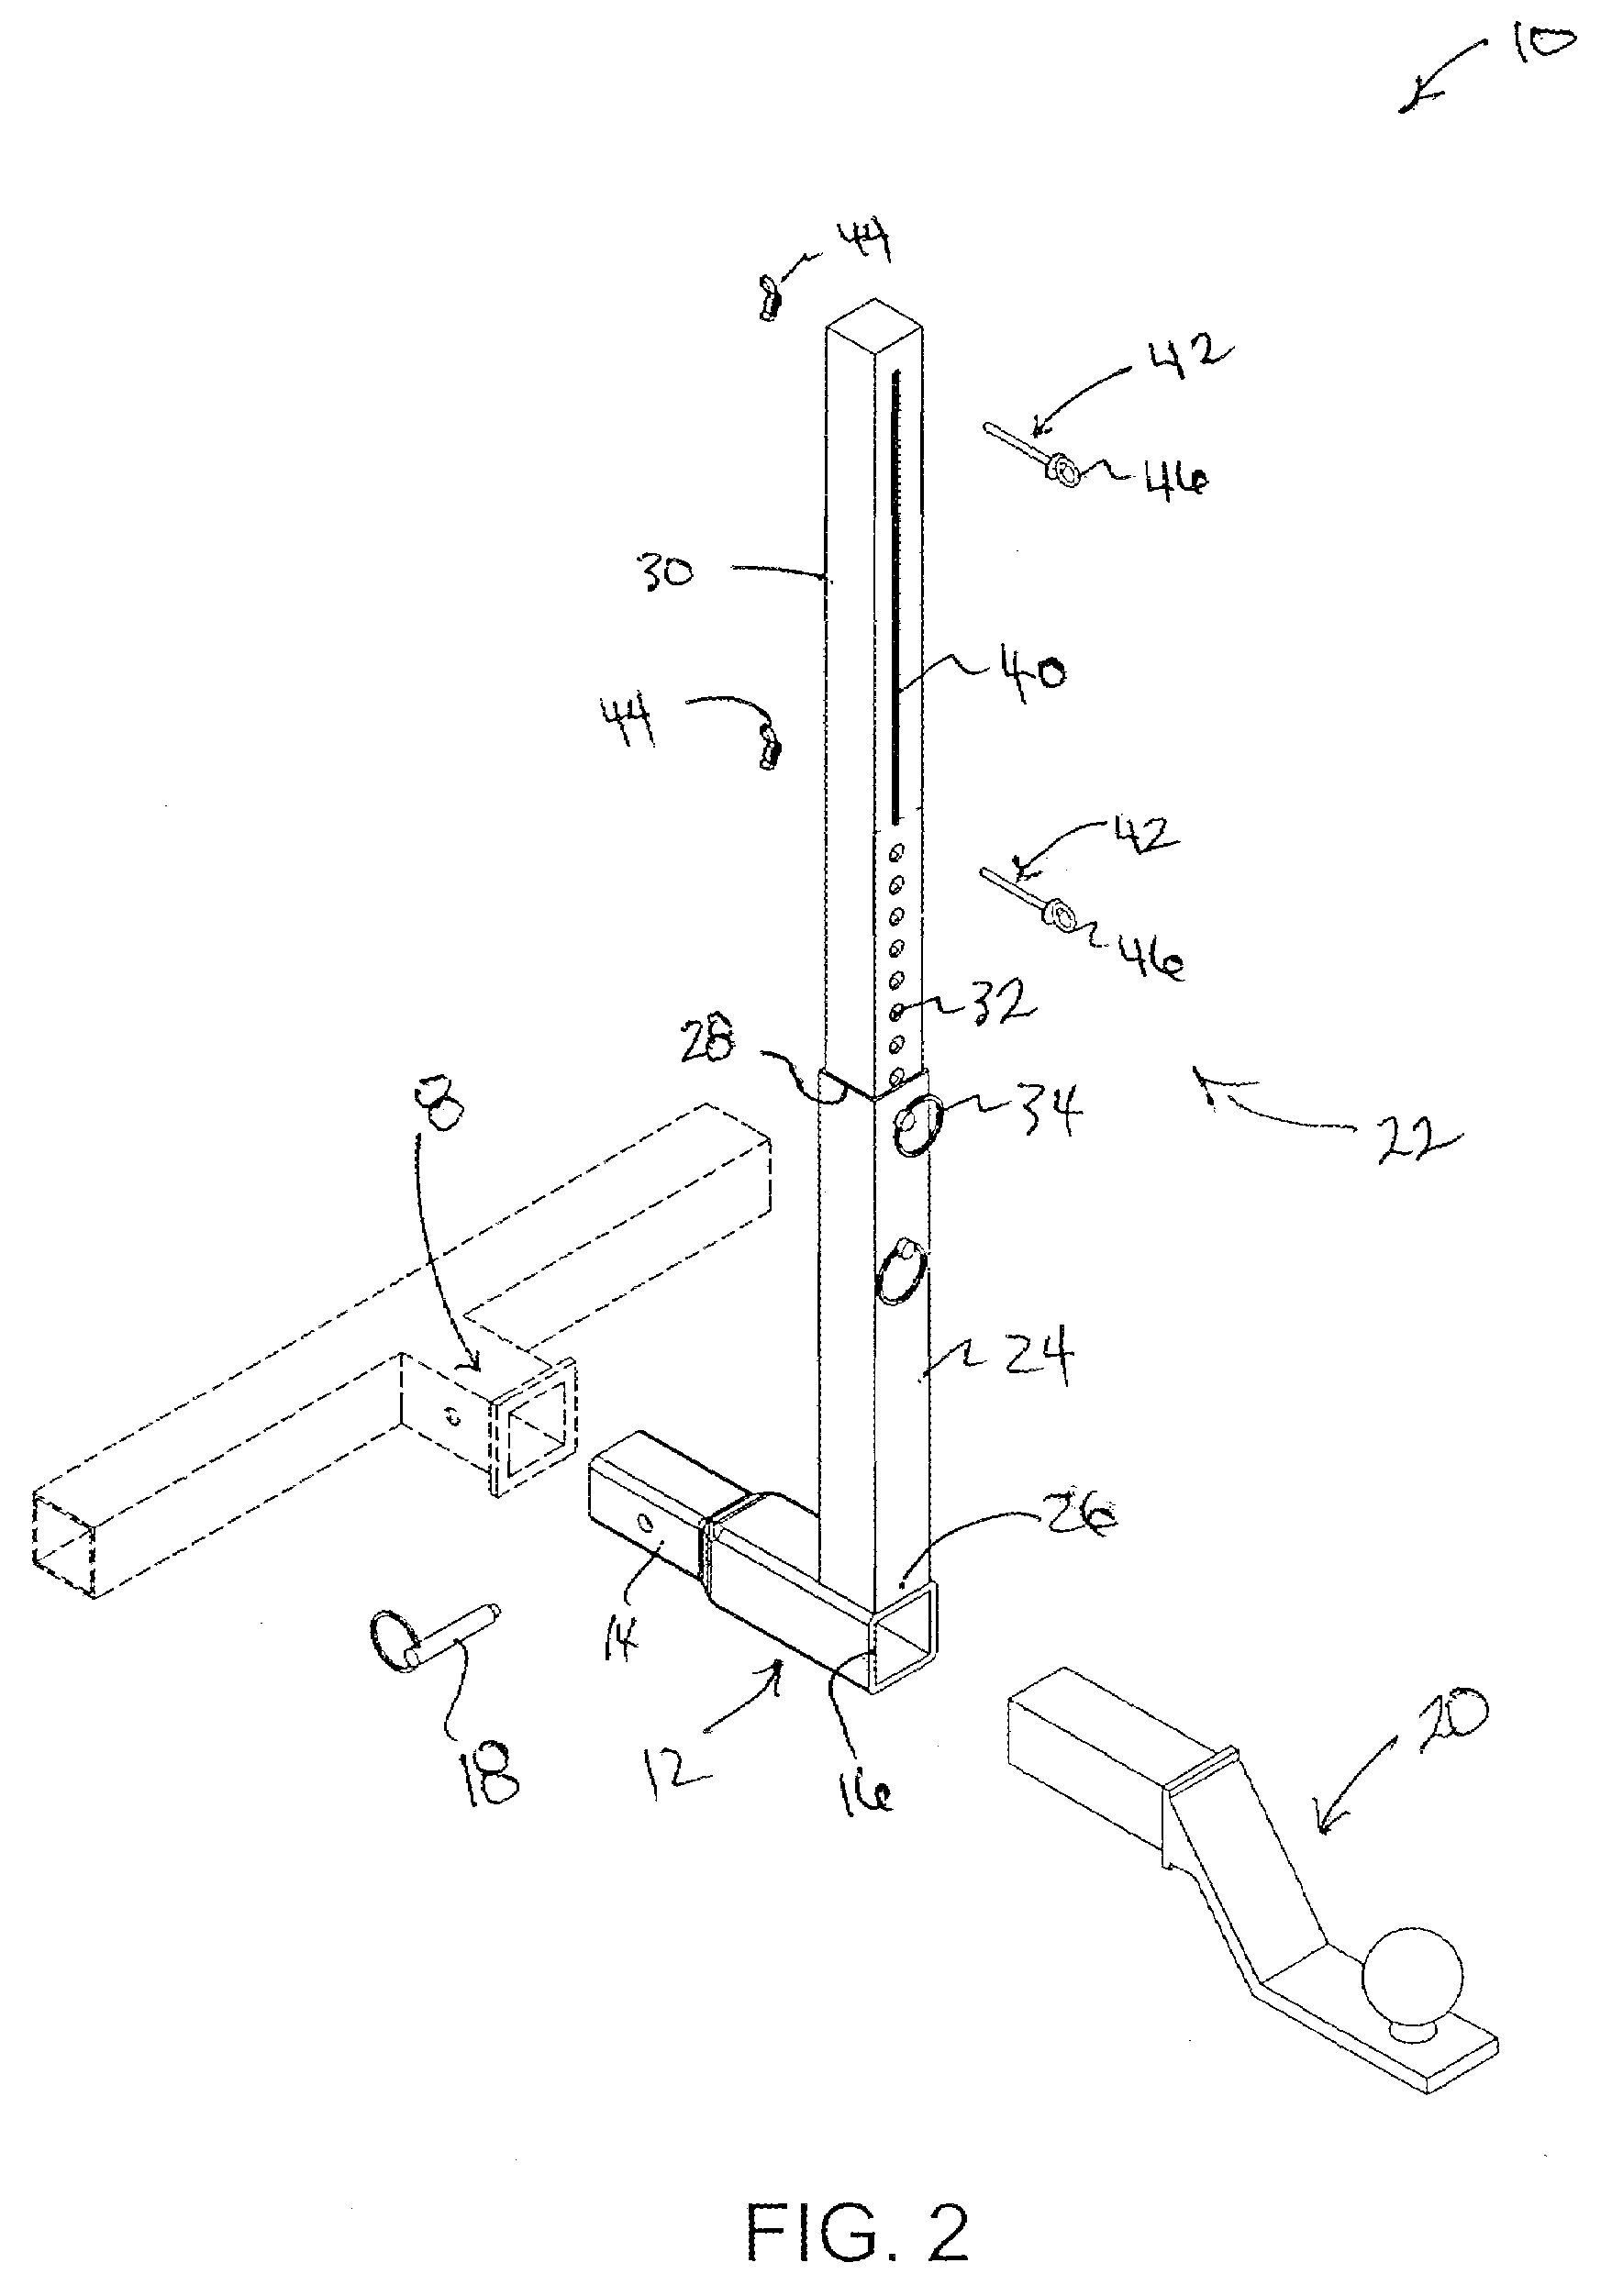 Display Apparatus for a Vehicle Having a Receiver Hitch